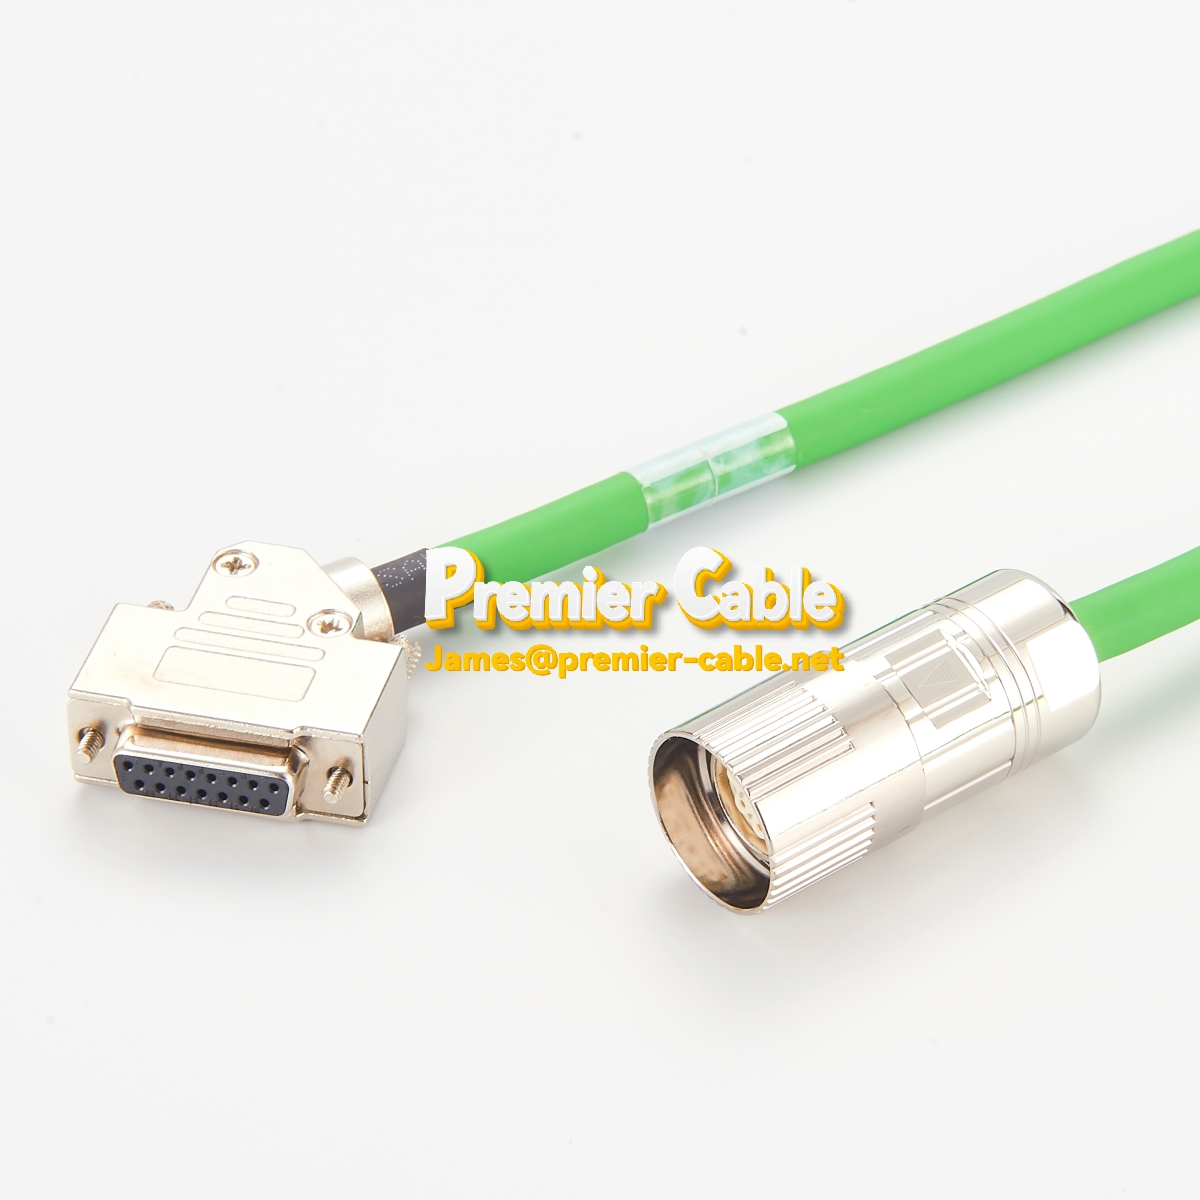 Encoder connection cable with M23 plug drag-chain high flexible